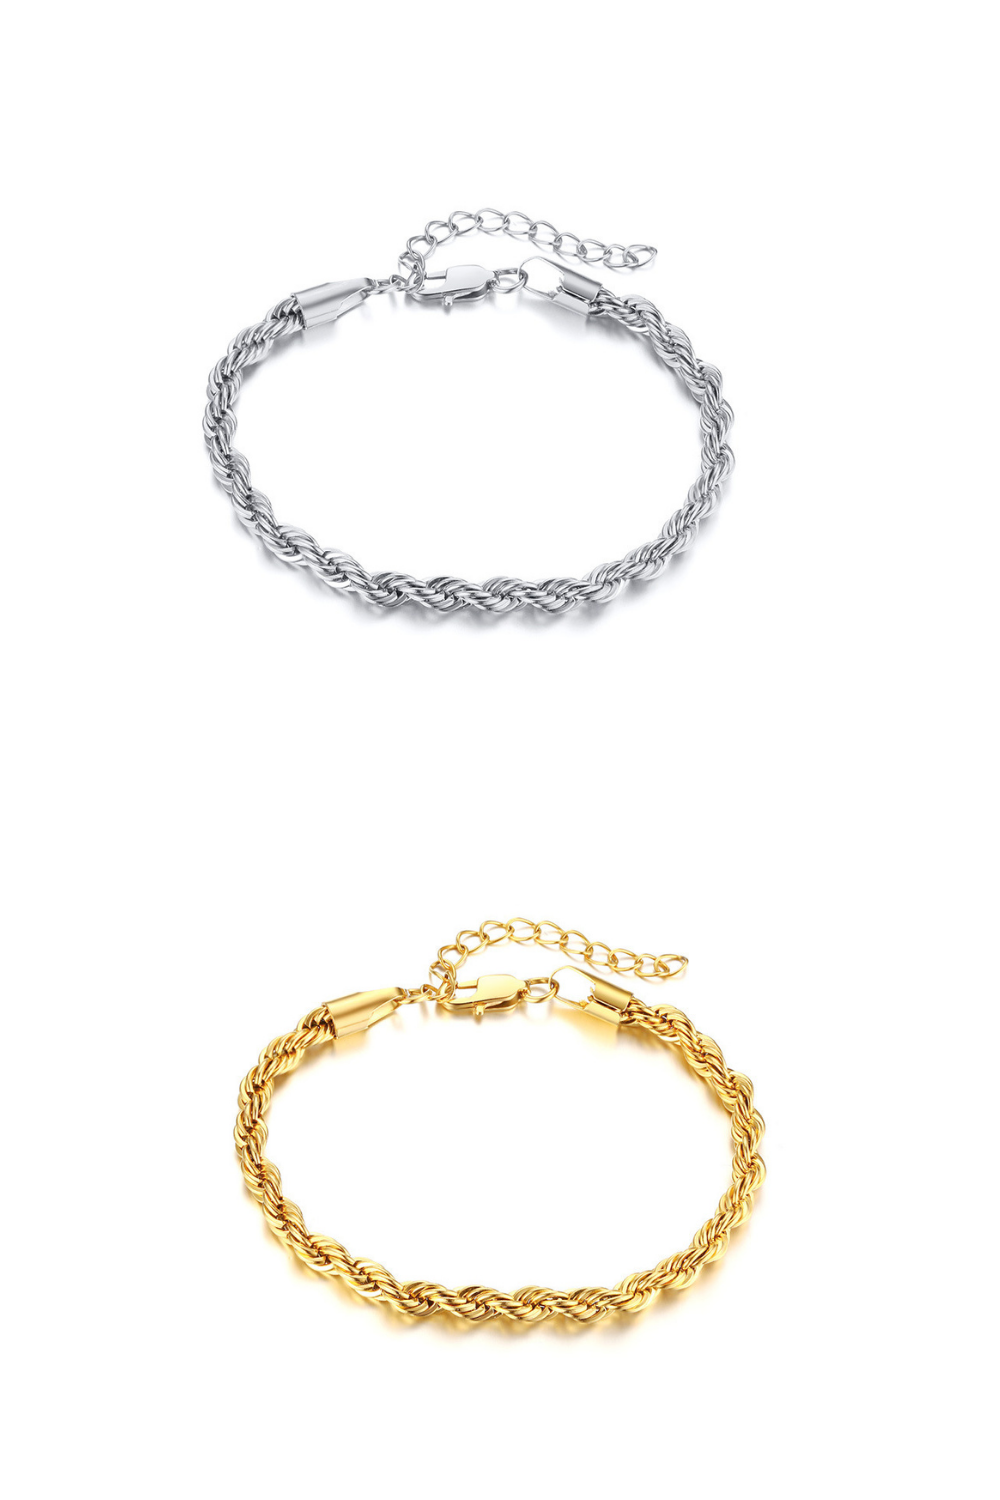 ROPE CHAIN BRACELET (Gold or Silver)